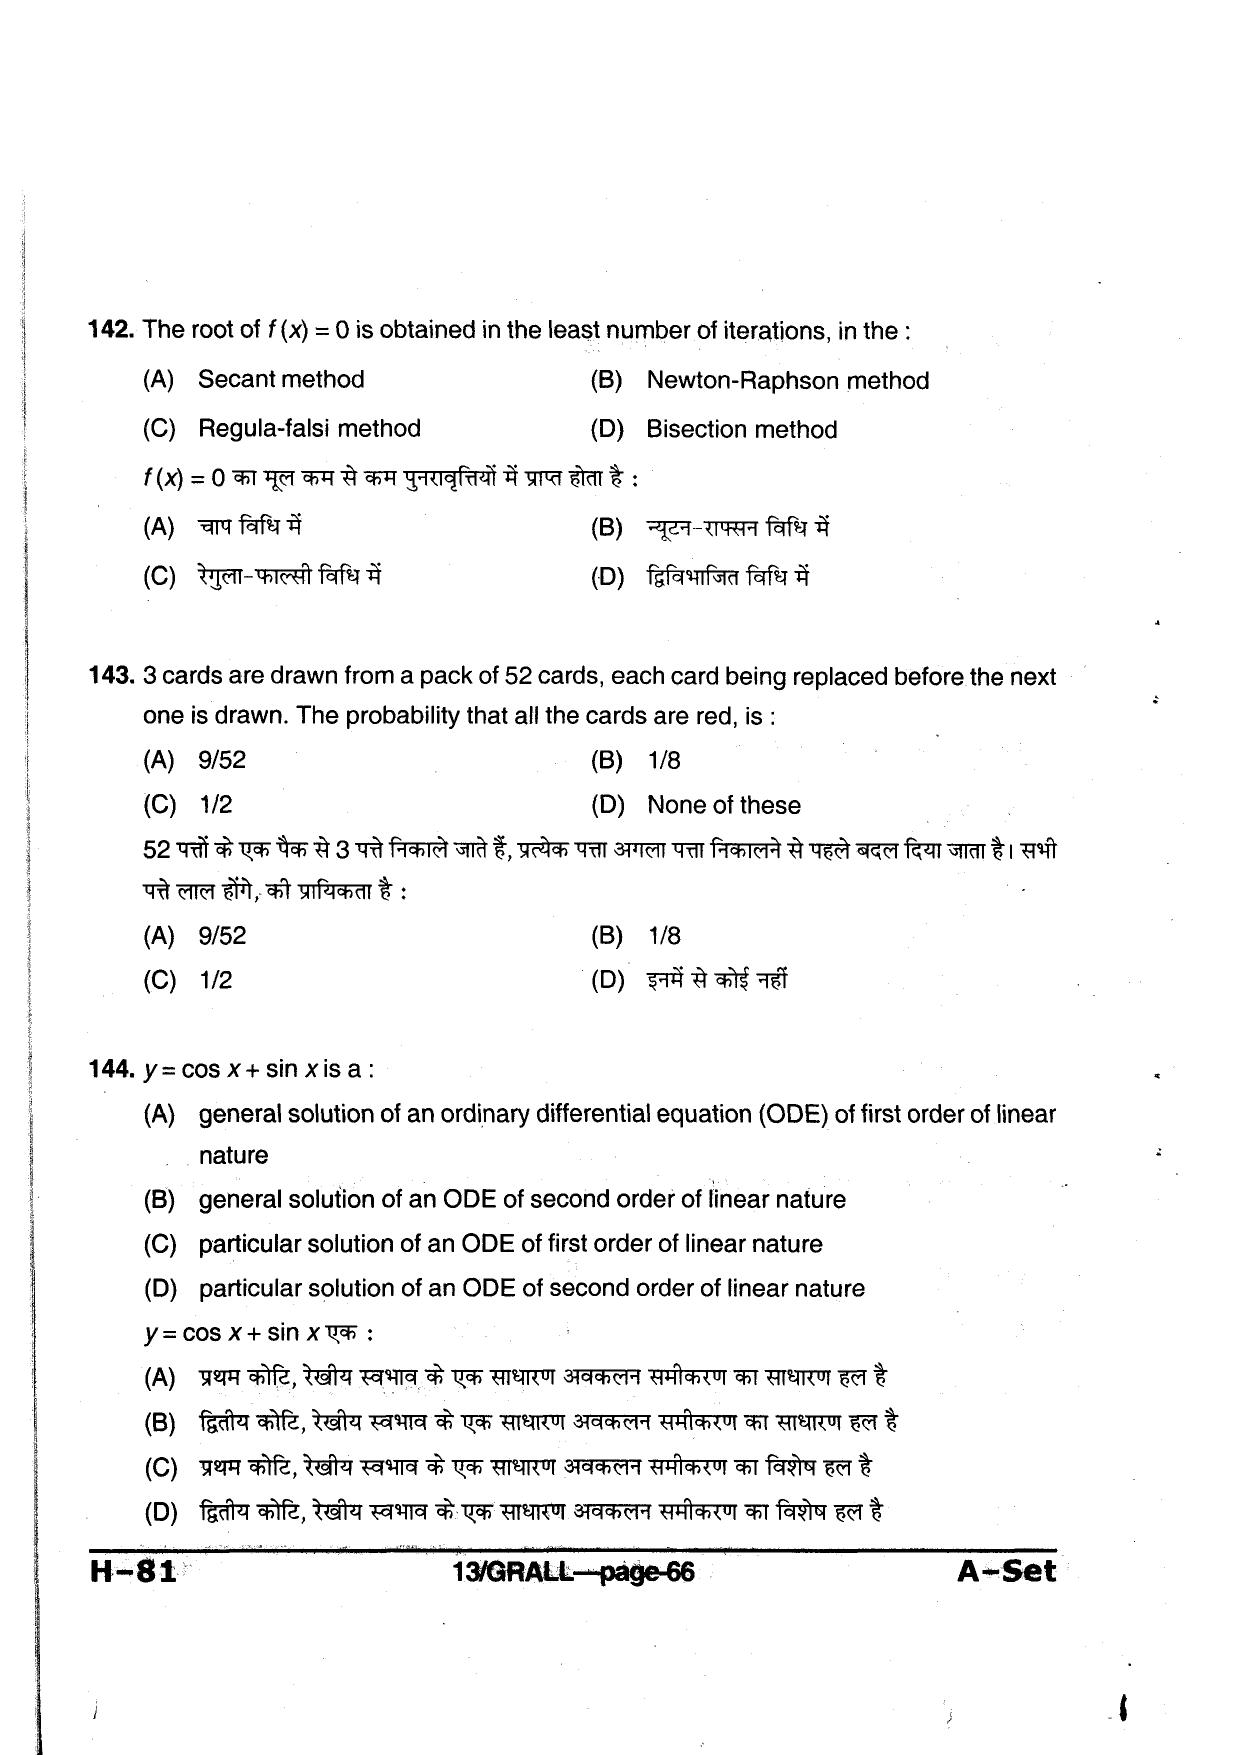 MP PAT 2013 Question Paper - Paper I - Page 66